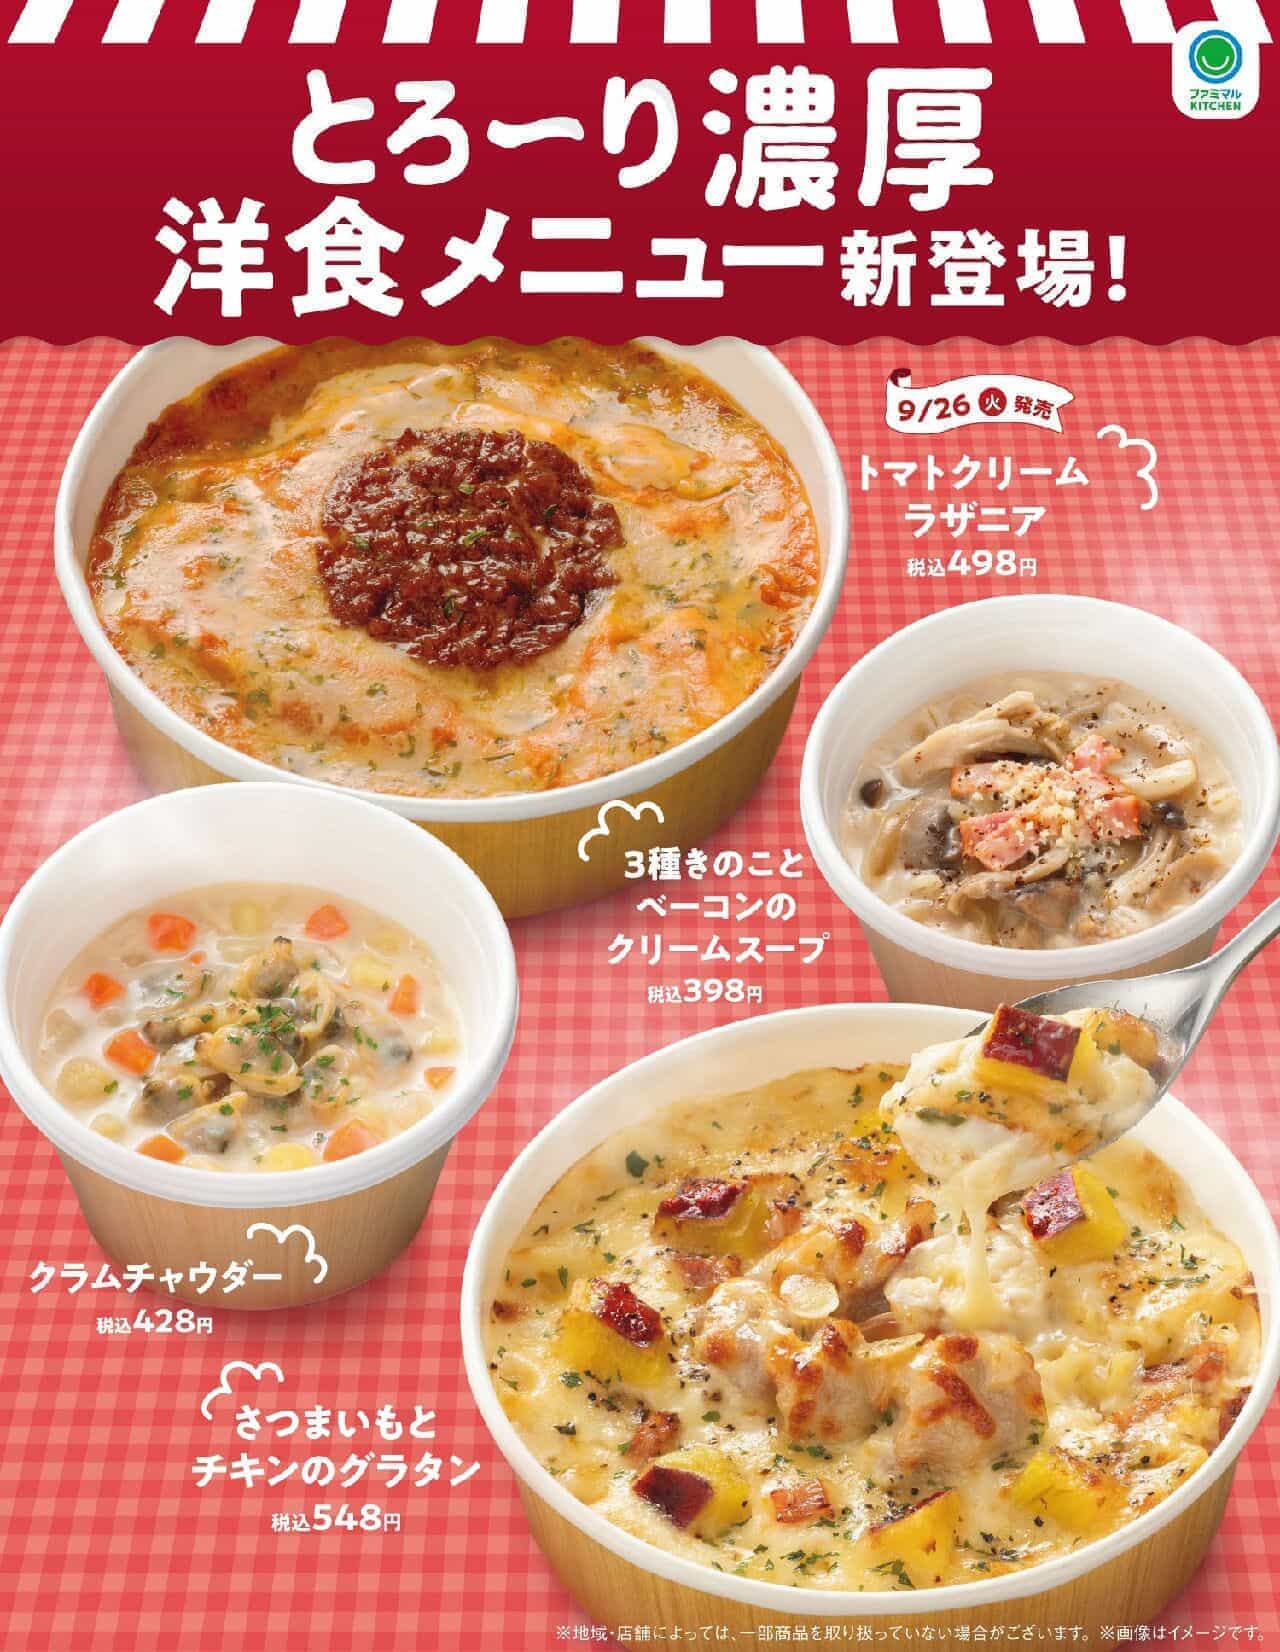 FamilyMart "Sweet Potato and Chicken Gratin" and 4 other products